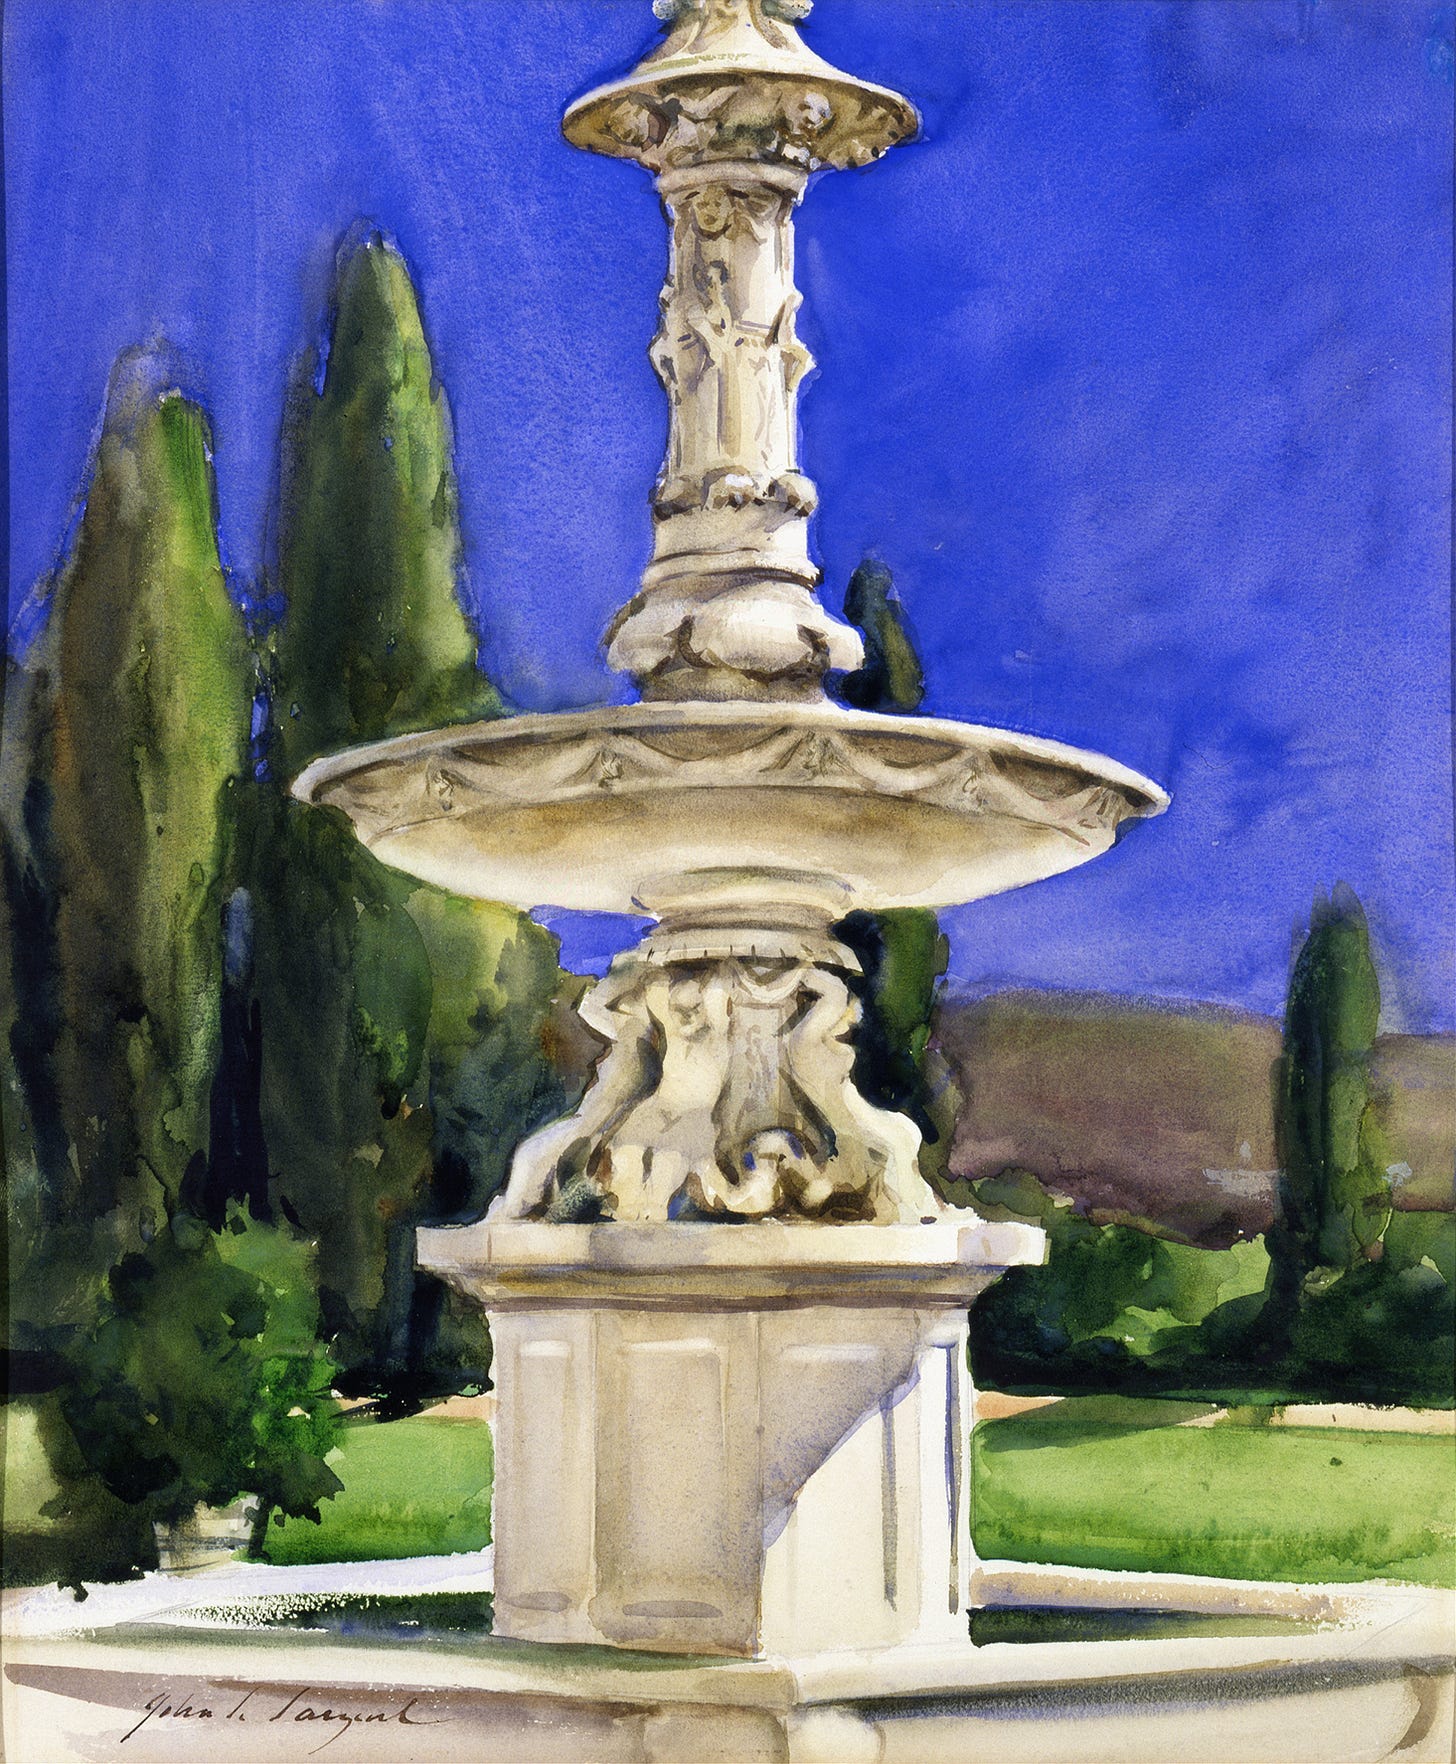 Marble Fountain in Italy (ca. 1907)